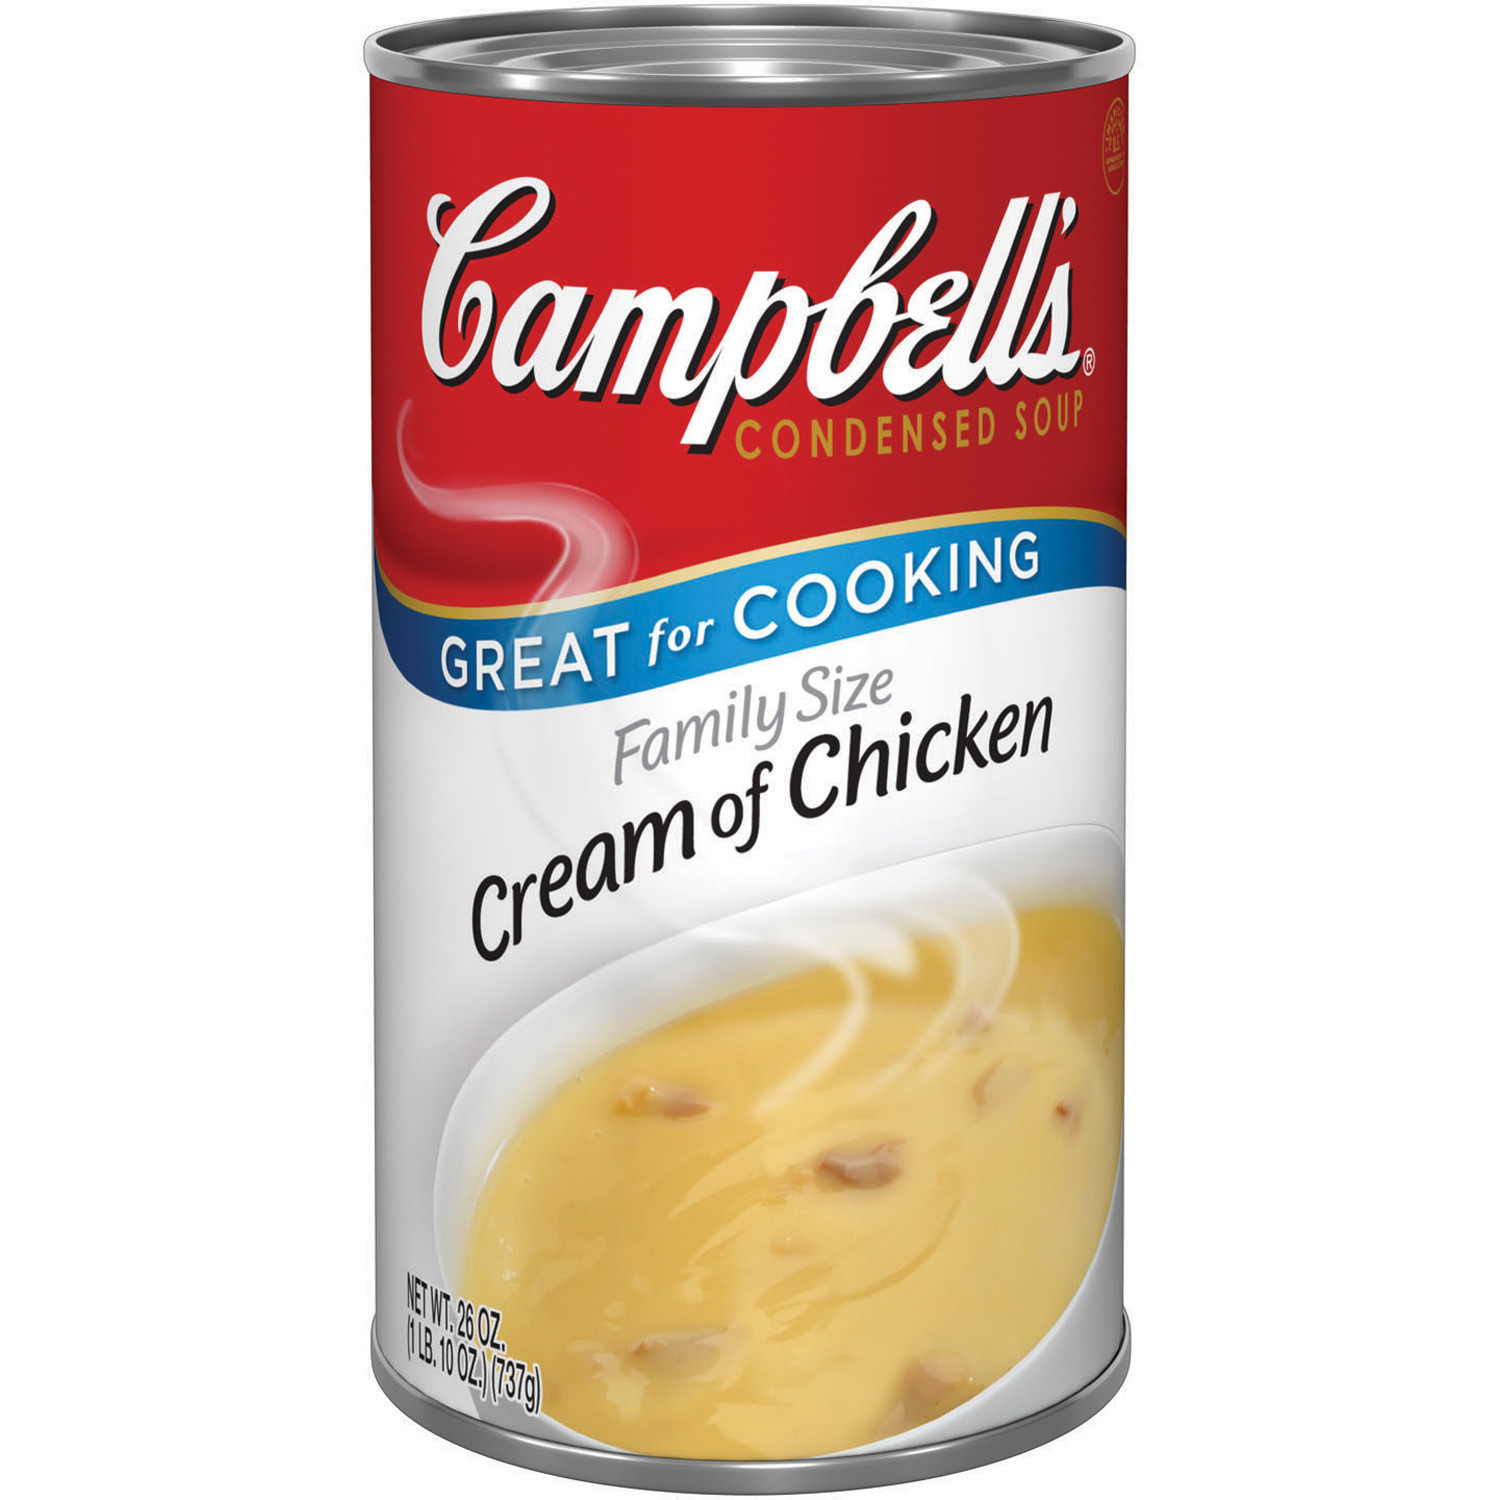 Campbells Recipes With Cream Of Chicken Soup
 Campbell s Cream of Chicken Family Size R&W Condensed Soup